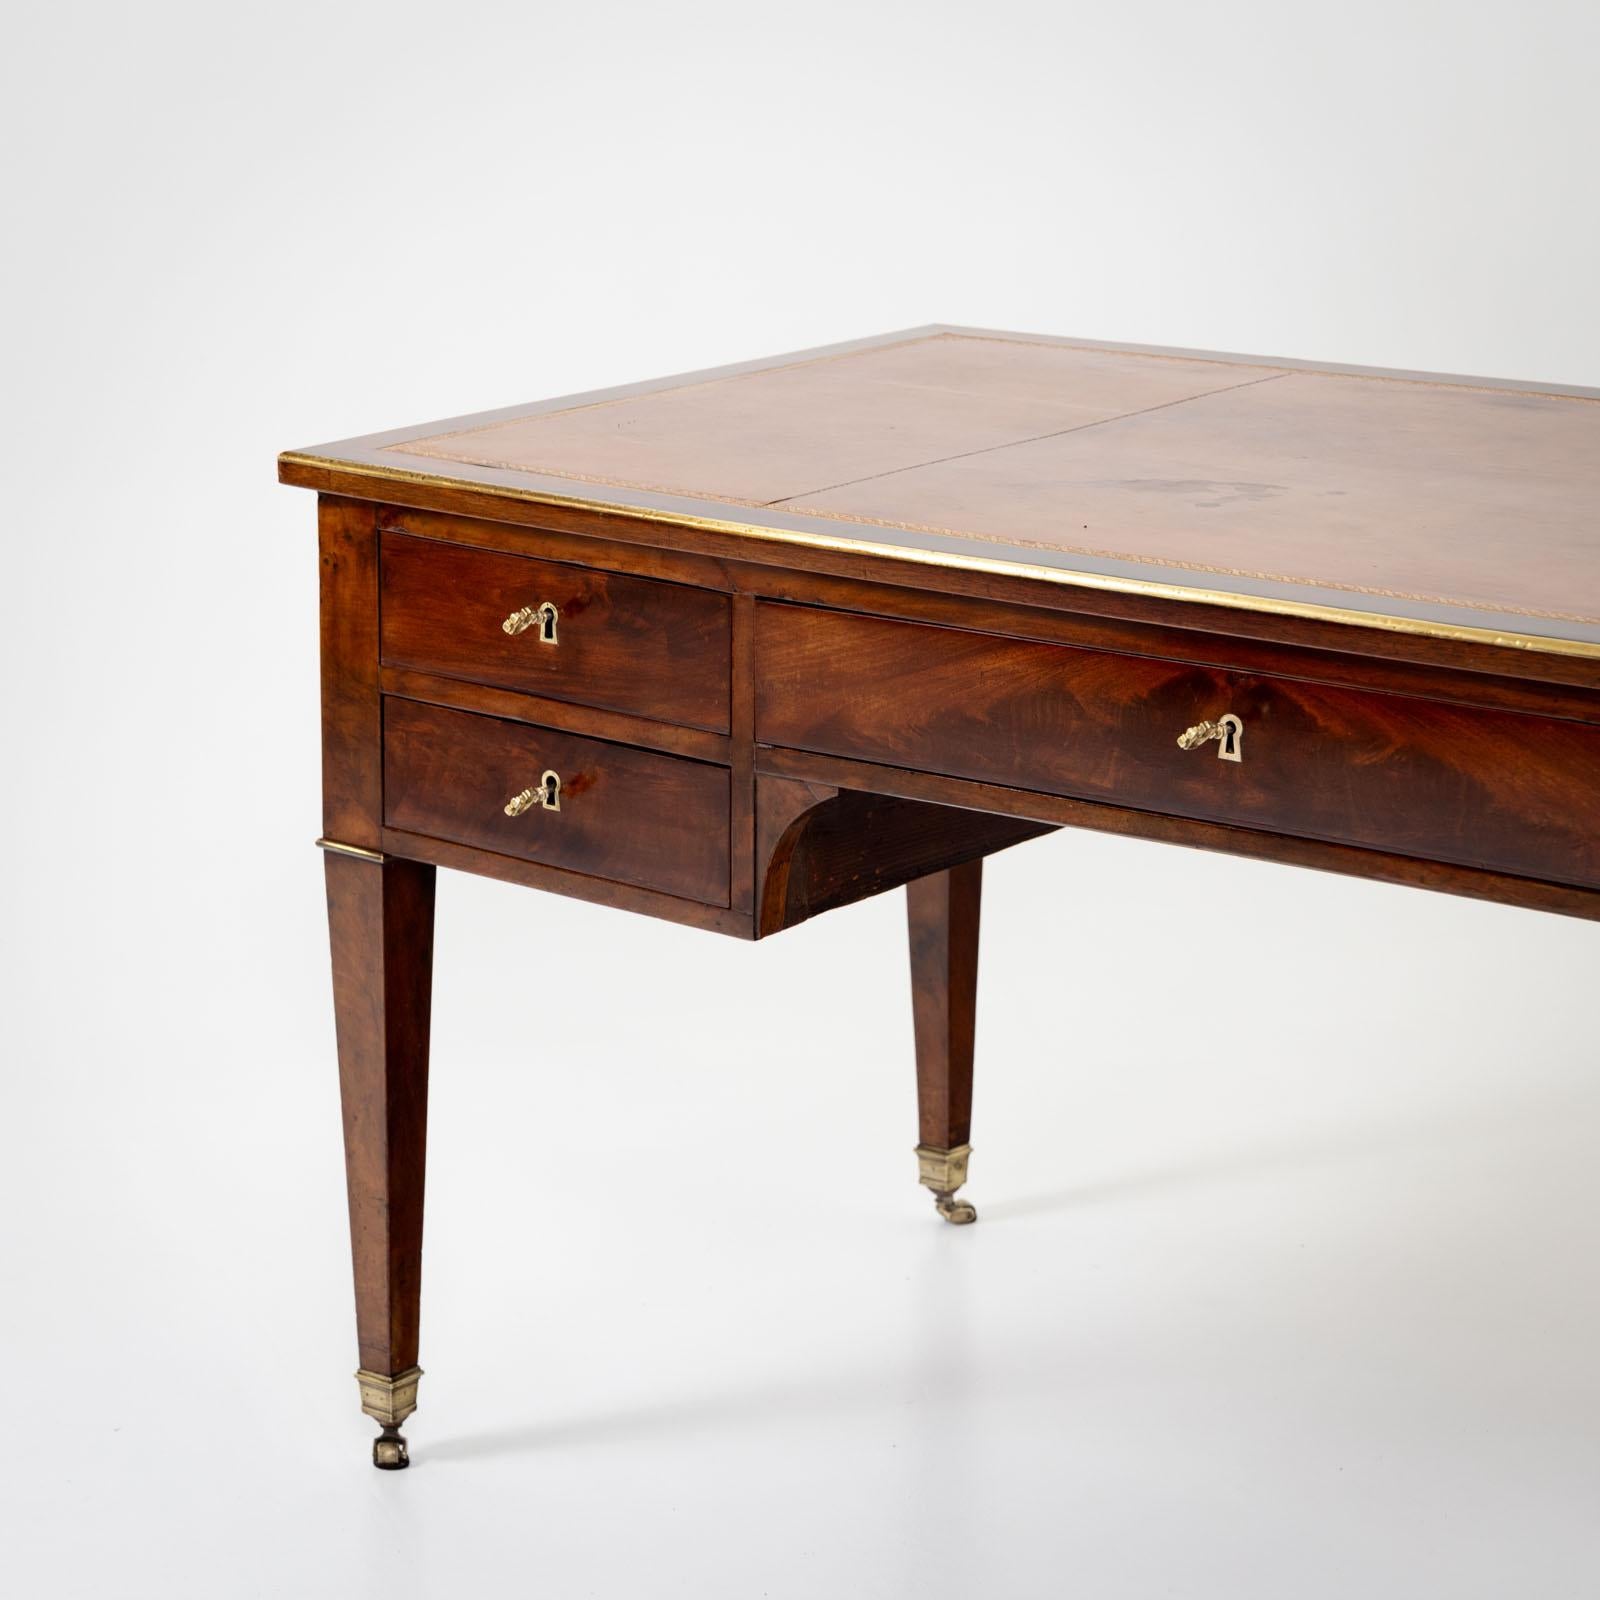 French bureau plat on square tapered legs with brass sabots and small castors. The desk is veneered in mahogany and the writing surface is covered in congac-colored leather. The keyholes are lined with brass and the tabletop is edged with a brass